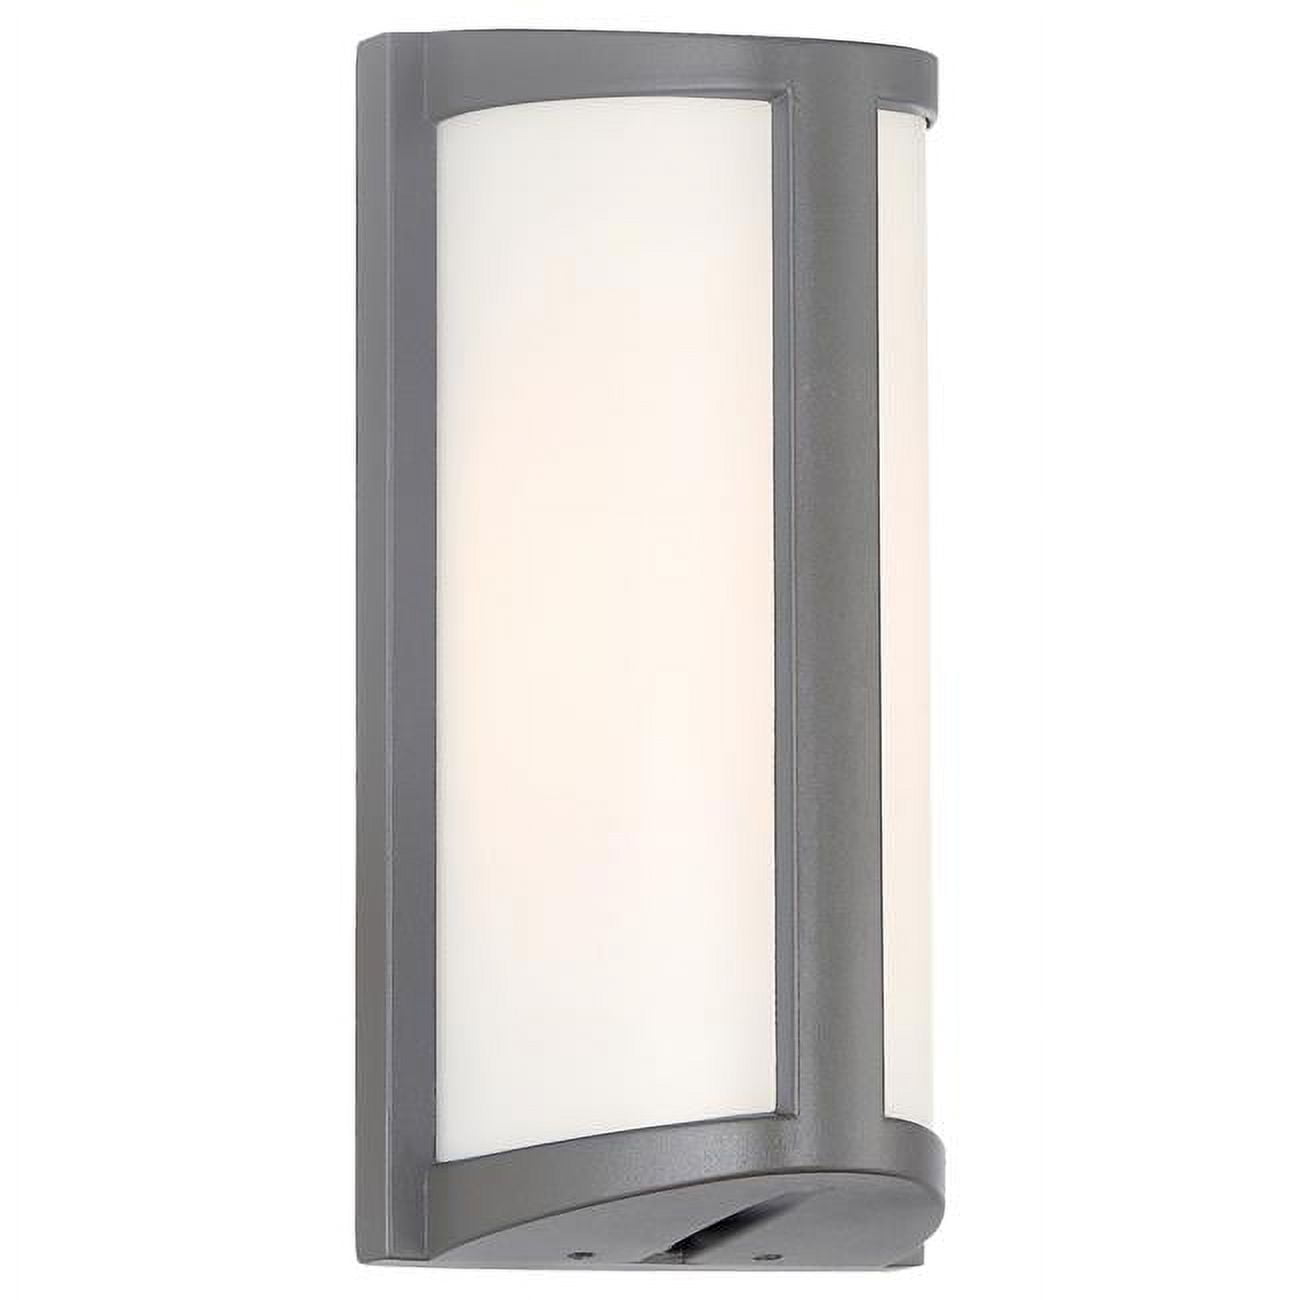 Picture of Access Lighting 20110LEDDMG-SAT-ACR Margate 5 in. Satin ADA Wall Sconce LED Wall Light, Acrylic Lens